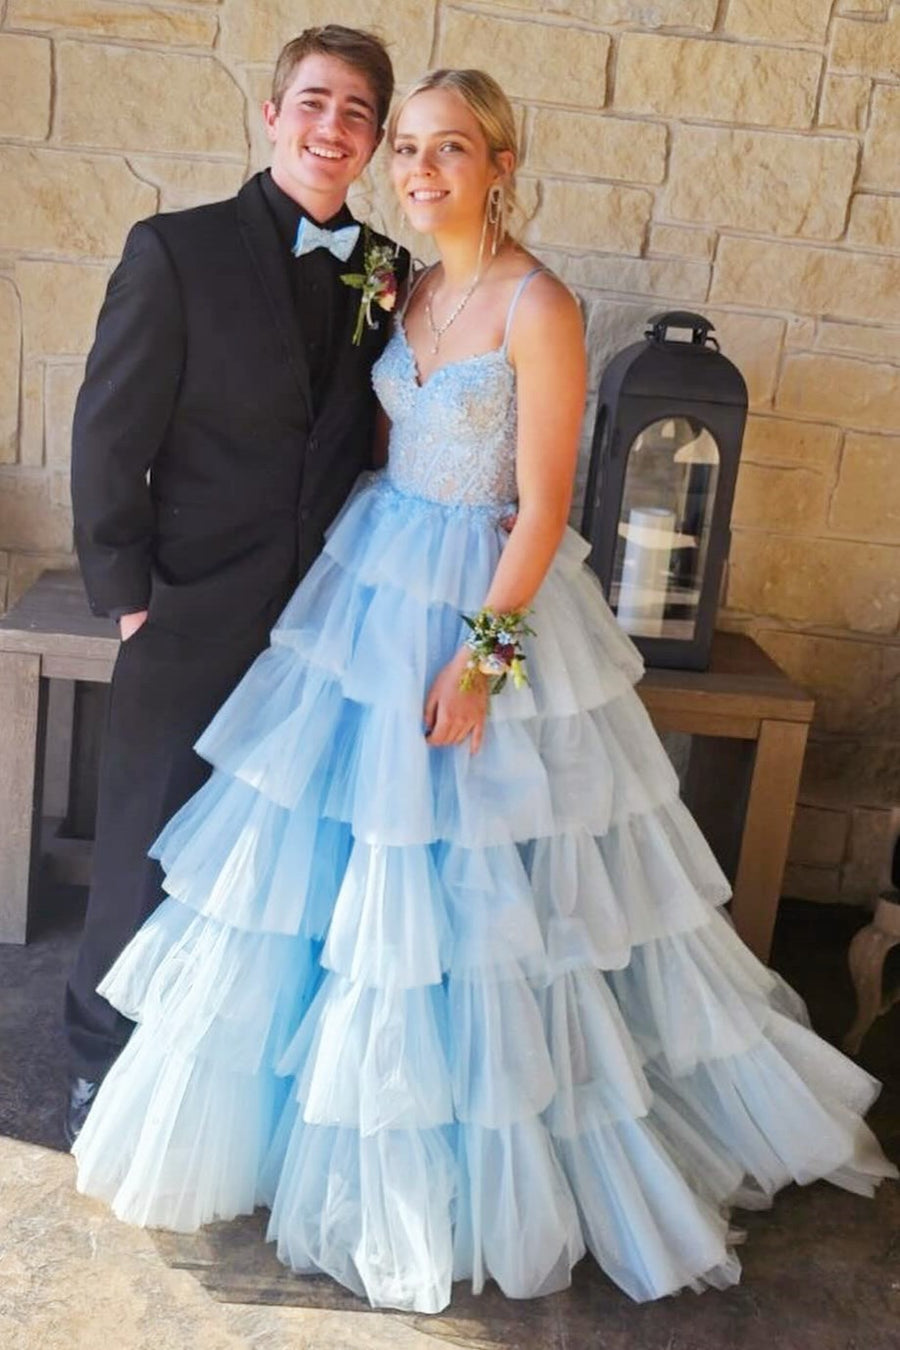 Tiered Ruffle Appliques Corset Long Prom Dress with Spaghetti Straps